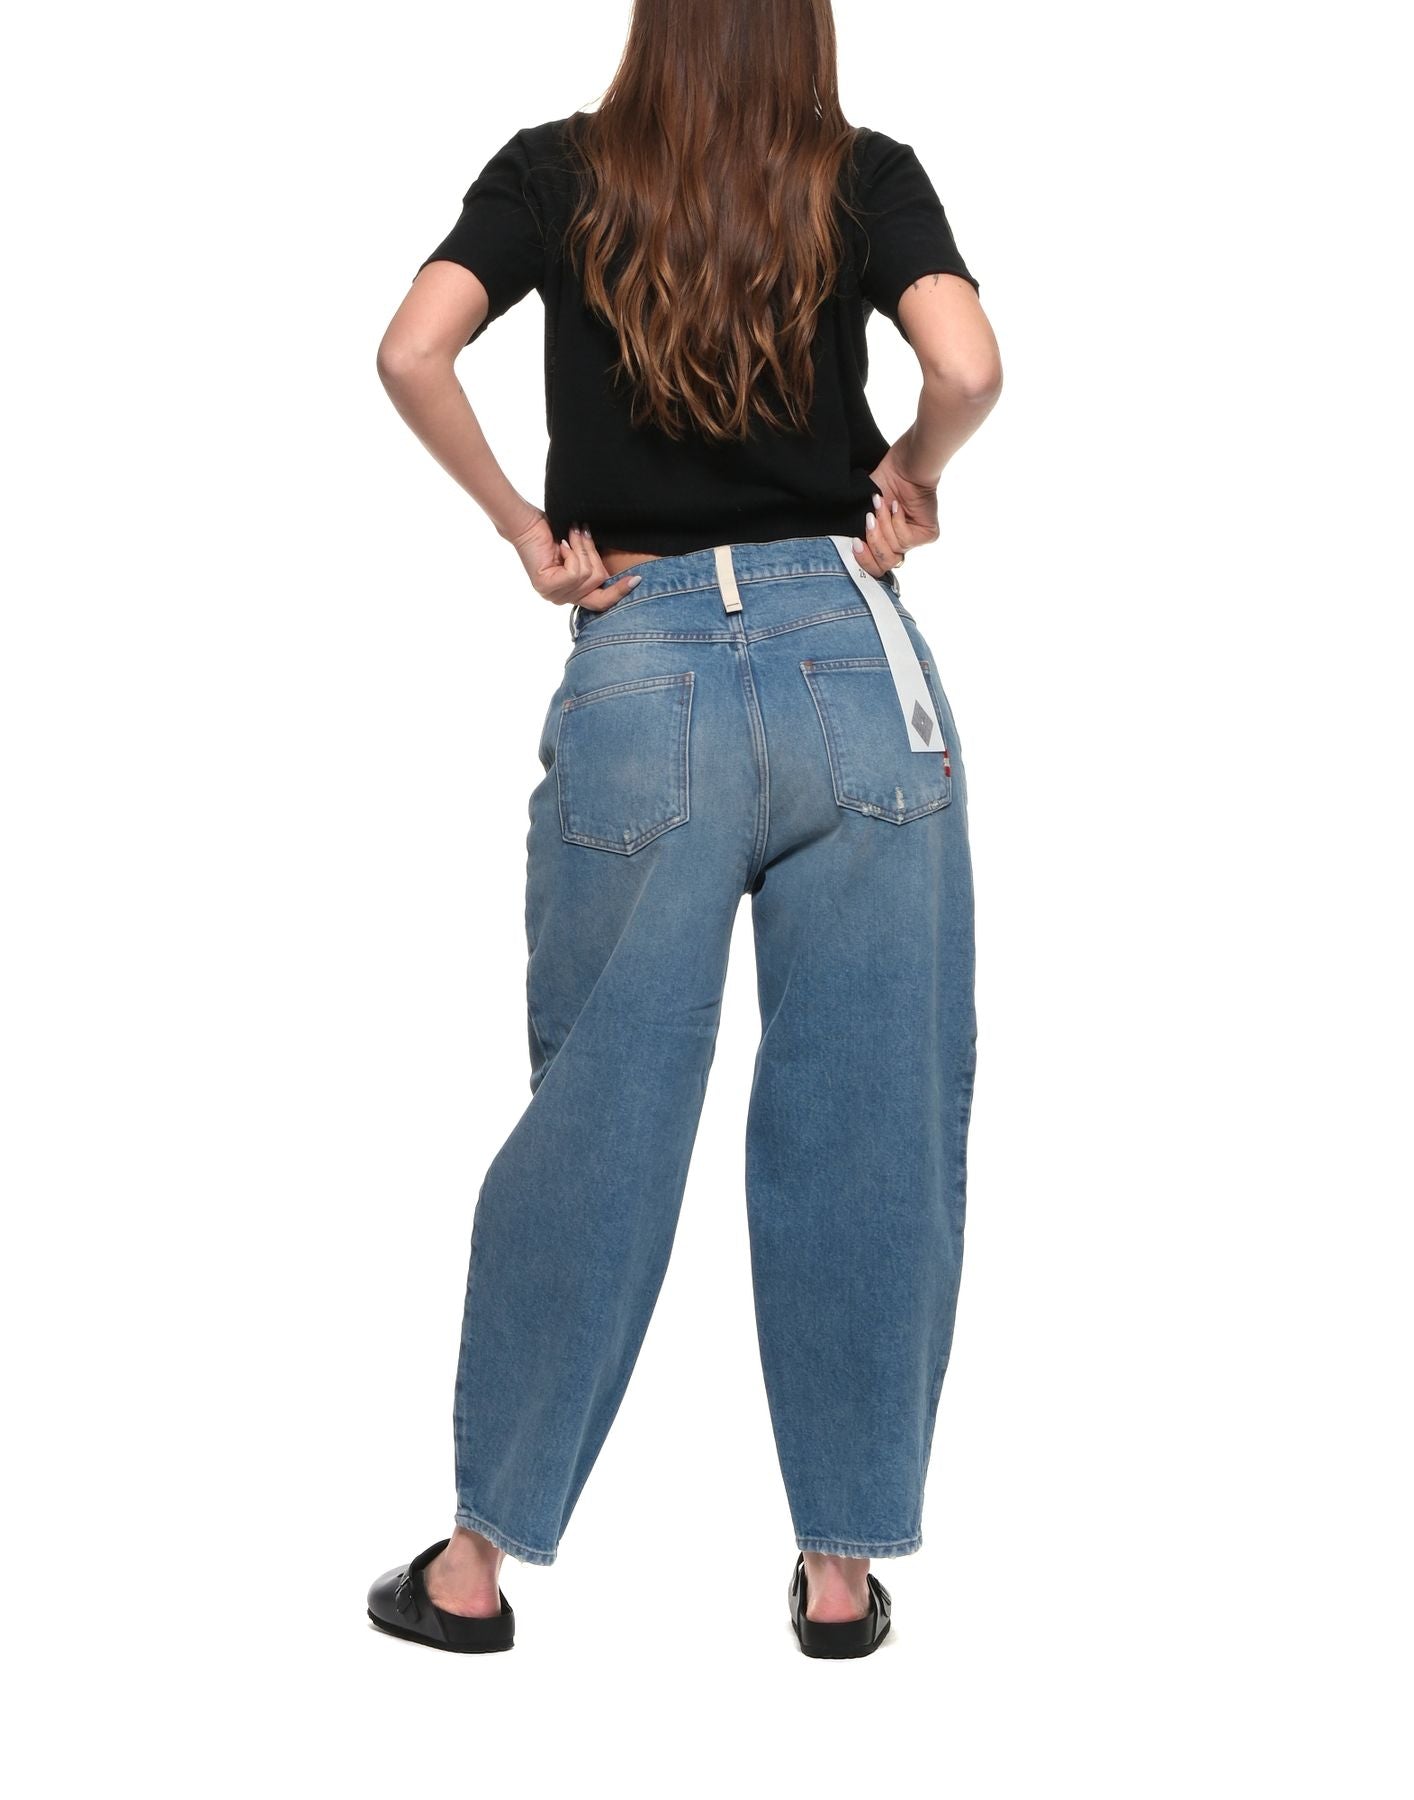 Jeans woman AMD047D4691772 REAL VINTAGE Amish